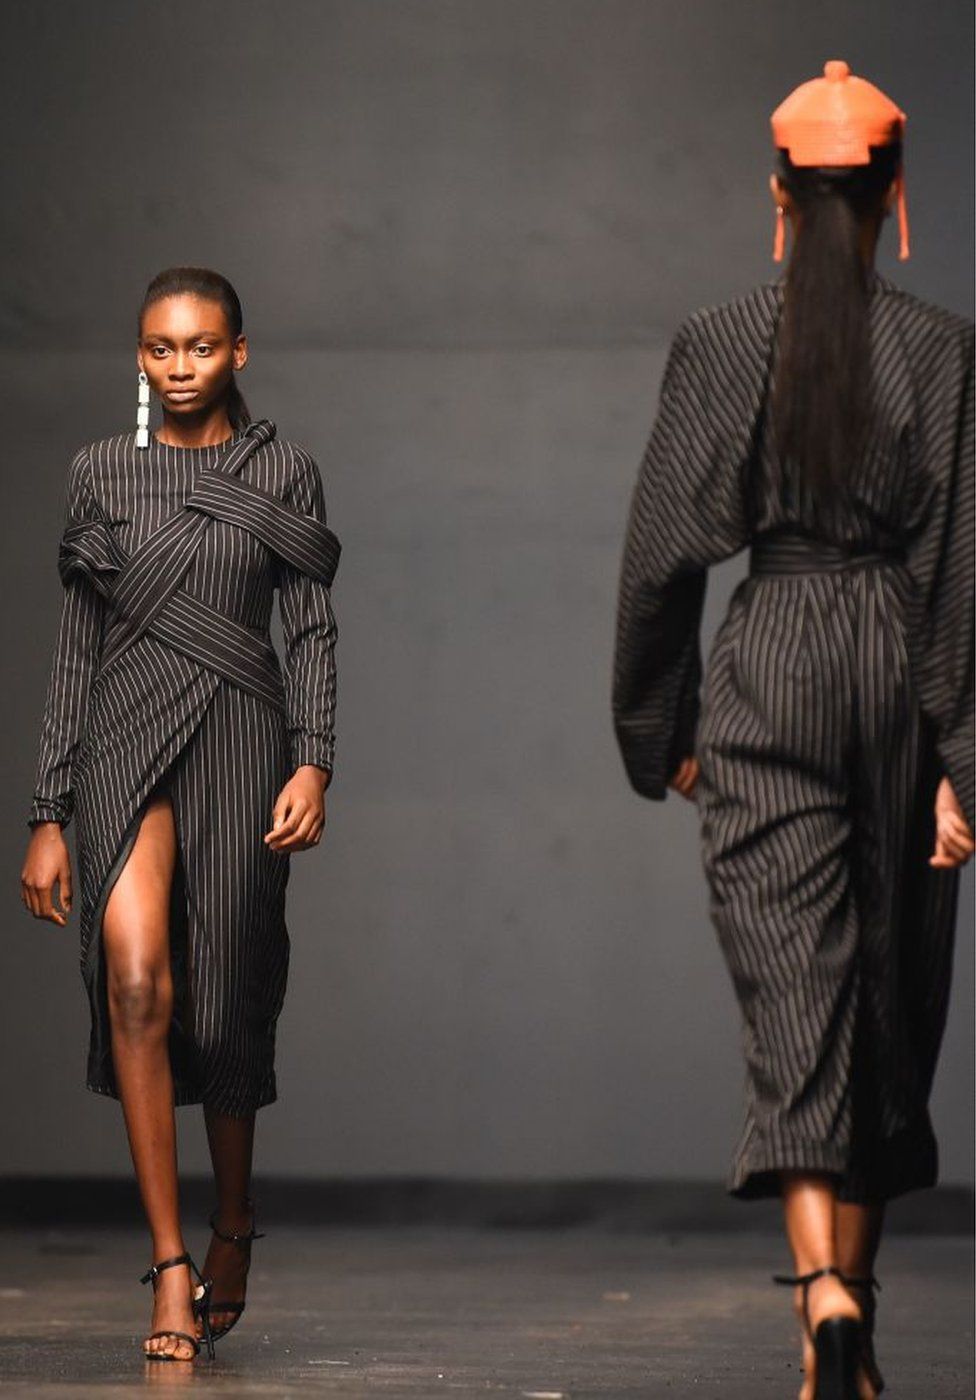 Designs by Fruche are modeled on the catwalk during Lagos Fashion Week.